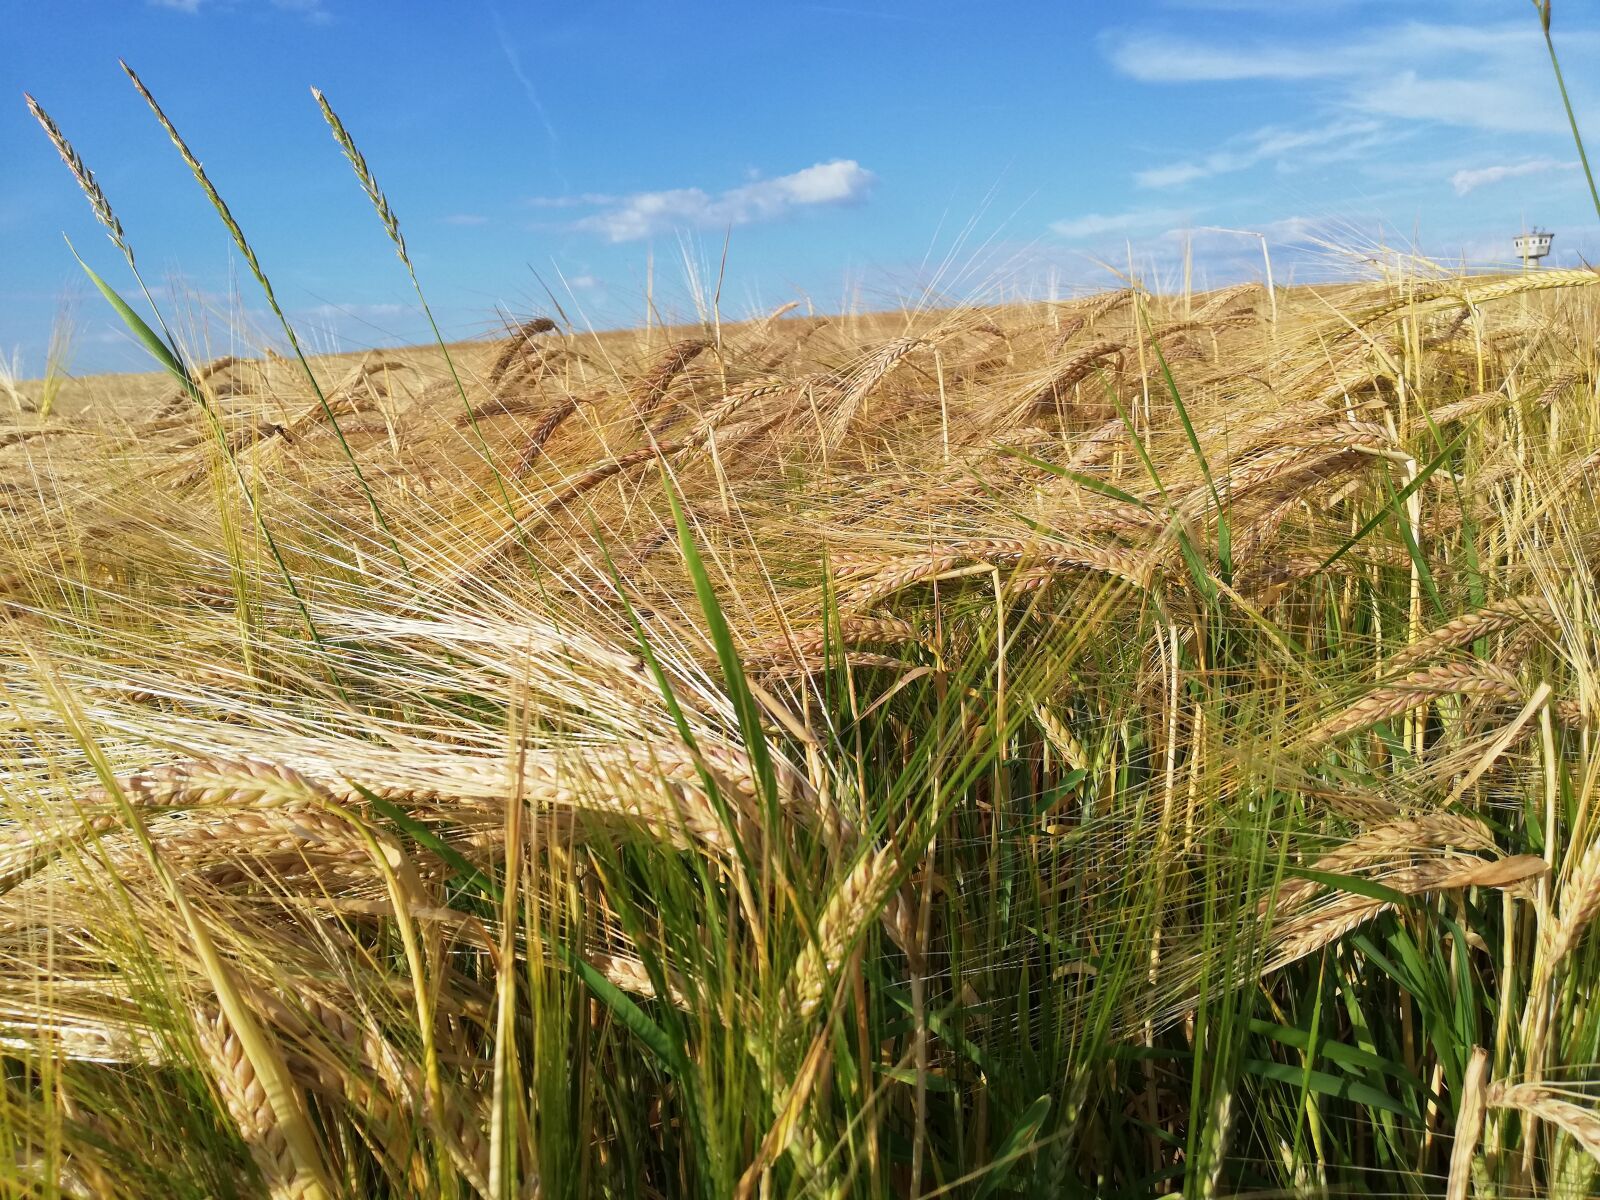 HUAWEI P20 lite sample photo. Summer, cereals, wheat photography